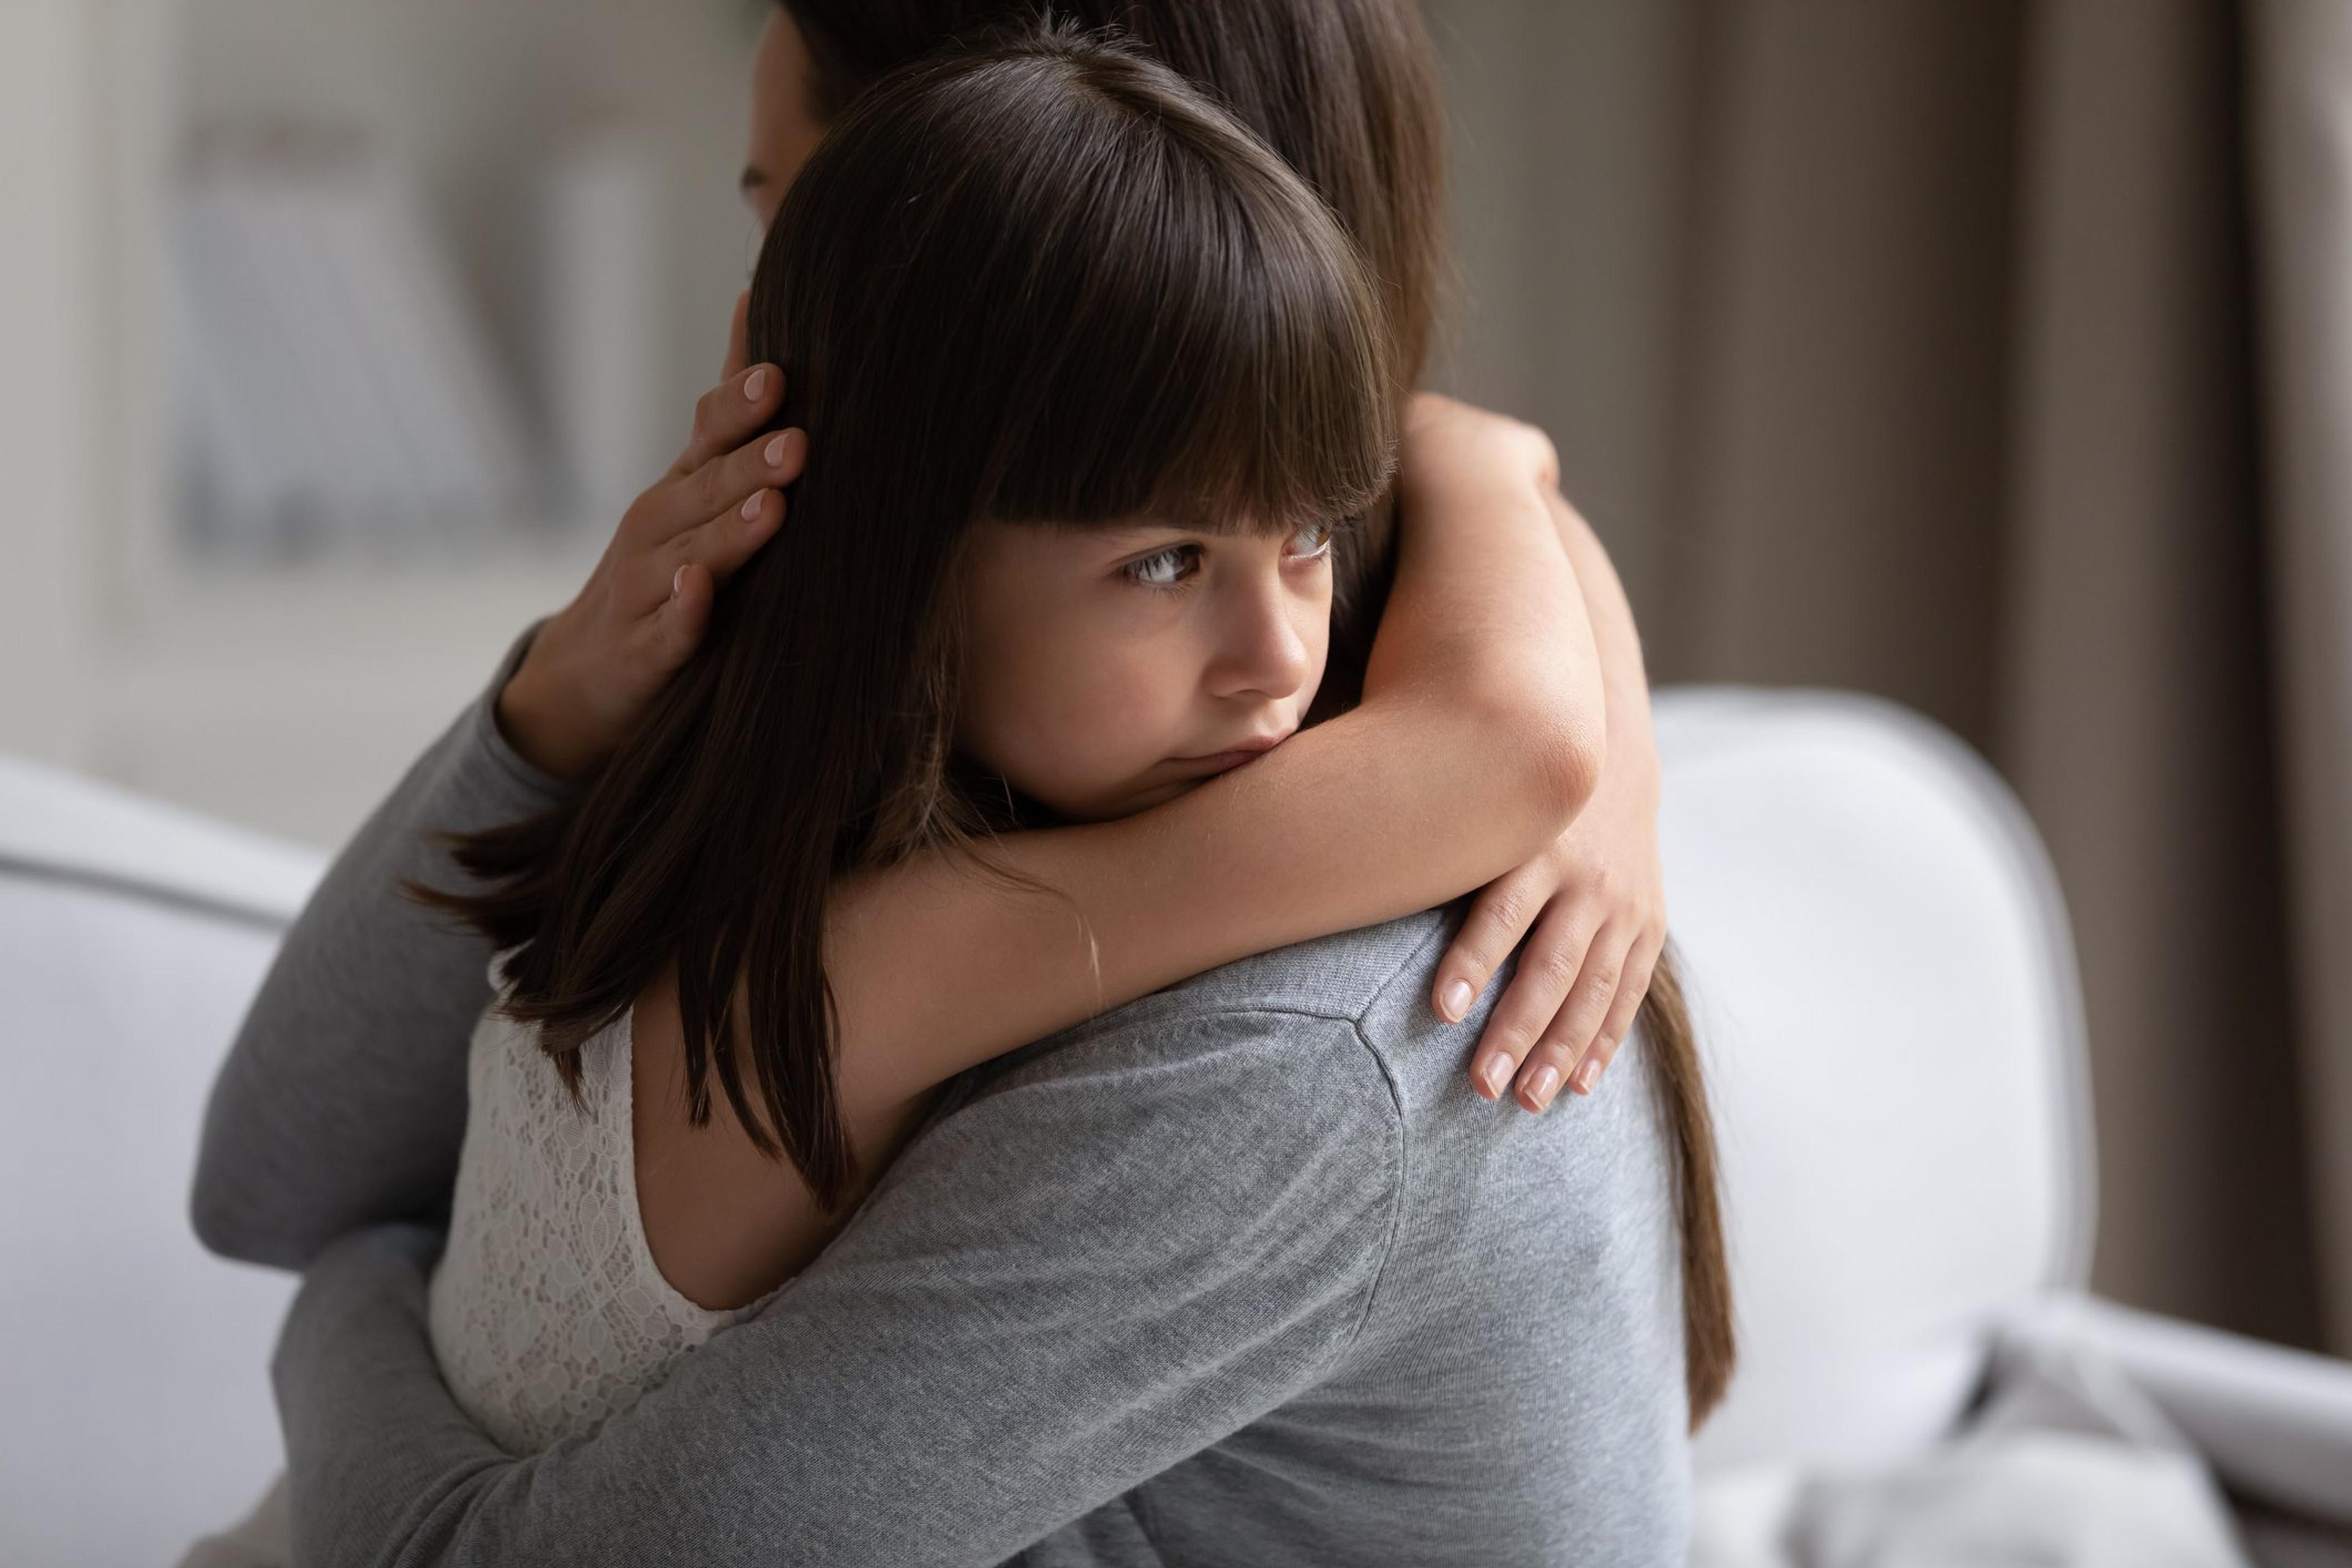 Grief impacts children, teenagers, young adults, middle-aged adults and older adults differently. Here are some approaches to try.